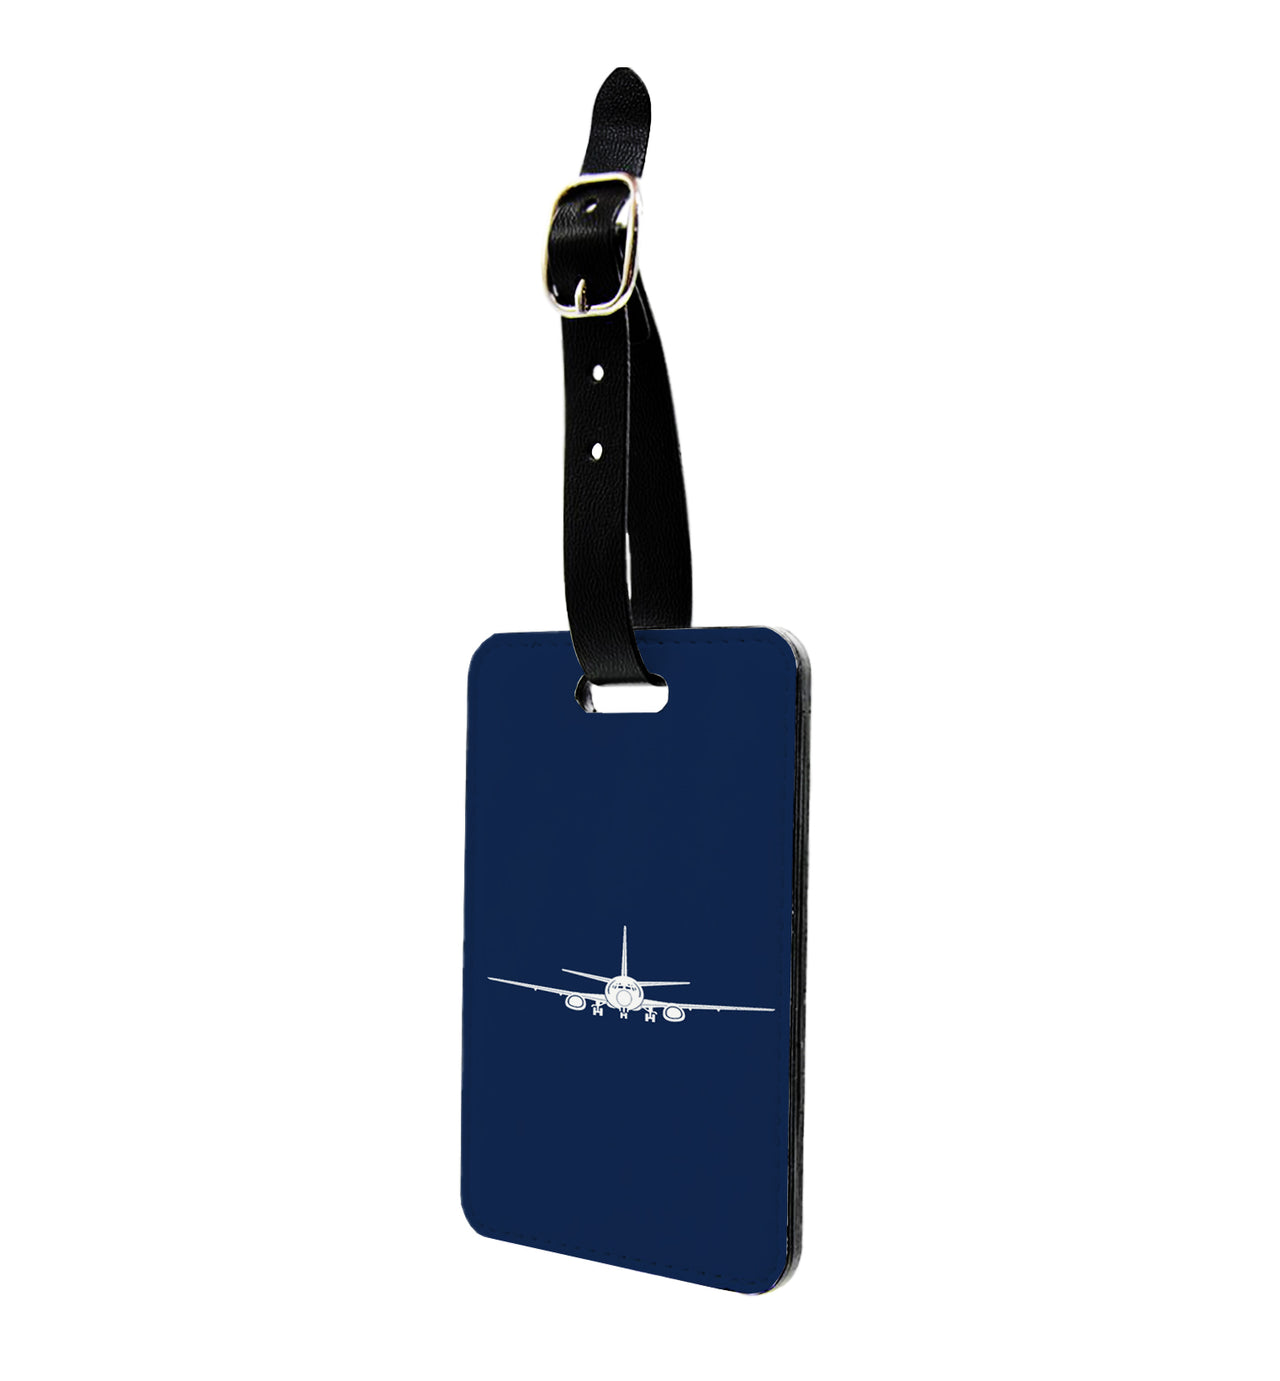 Boeing 737 Silhouette Designed Luggage Tag